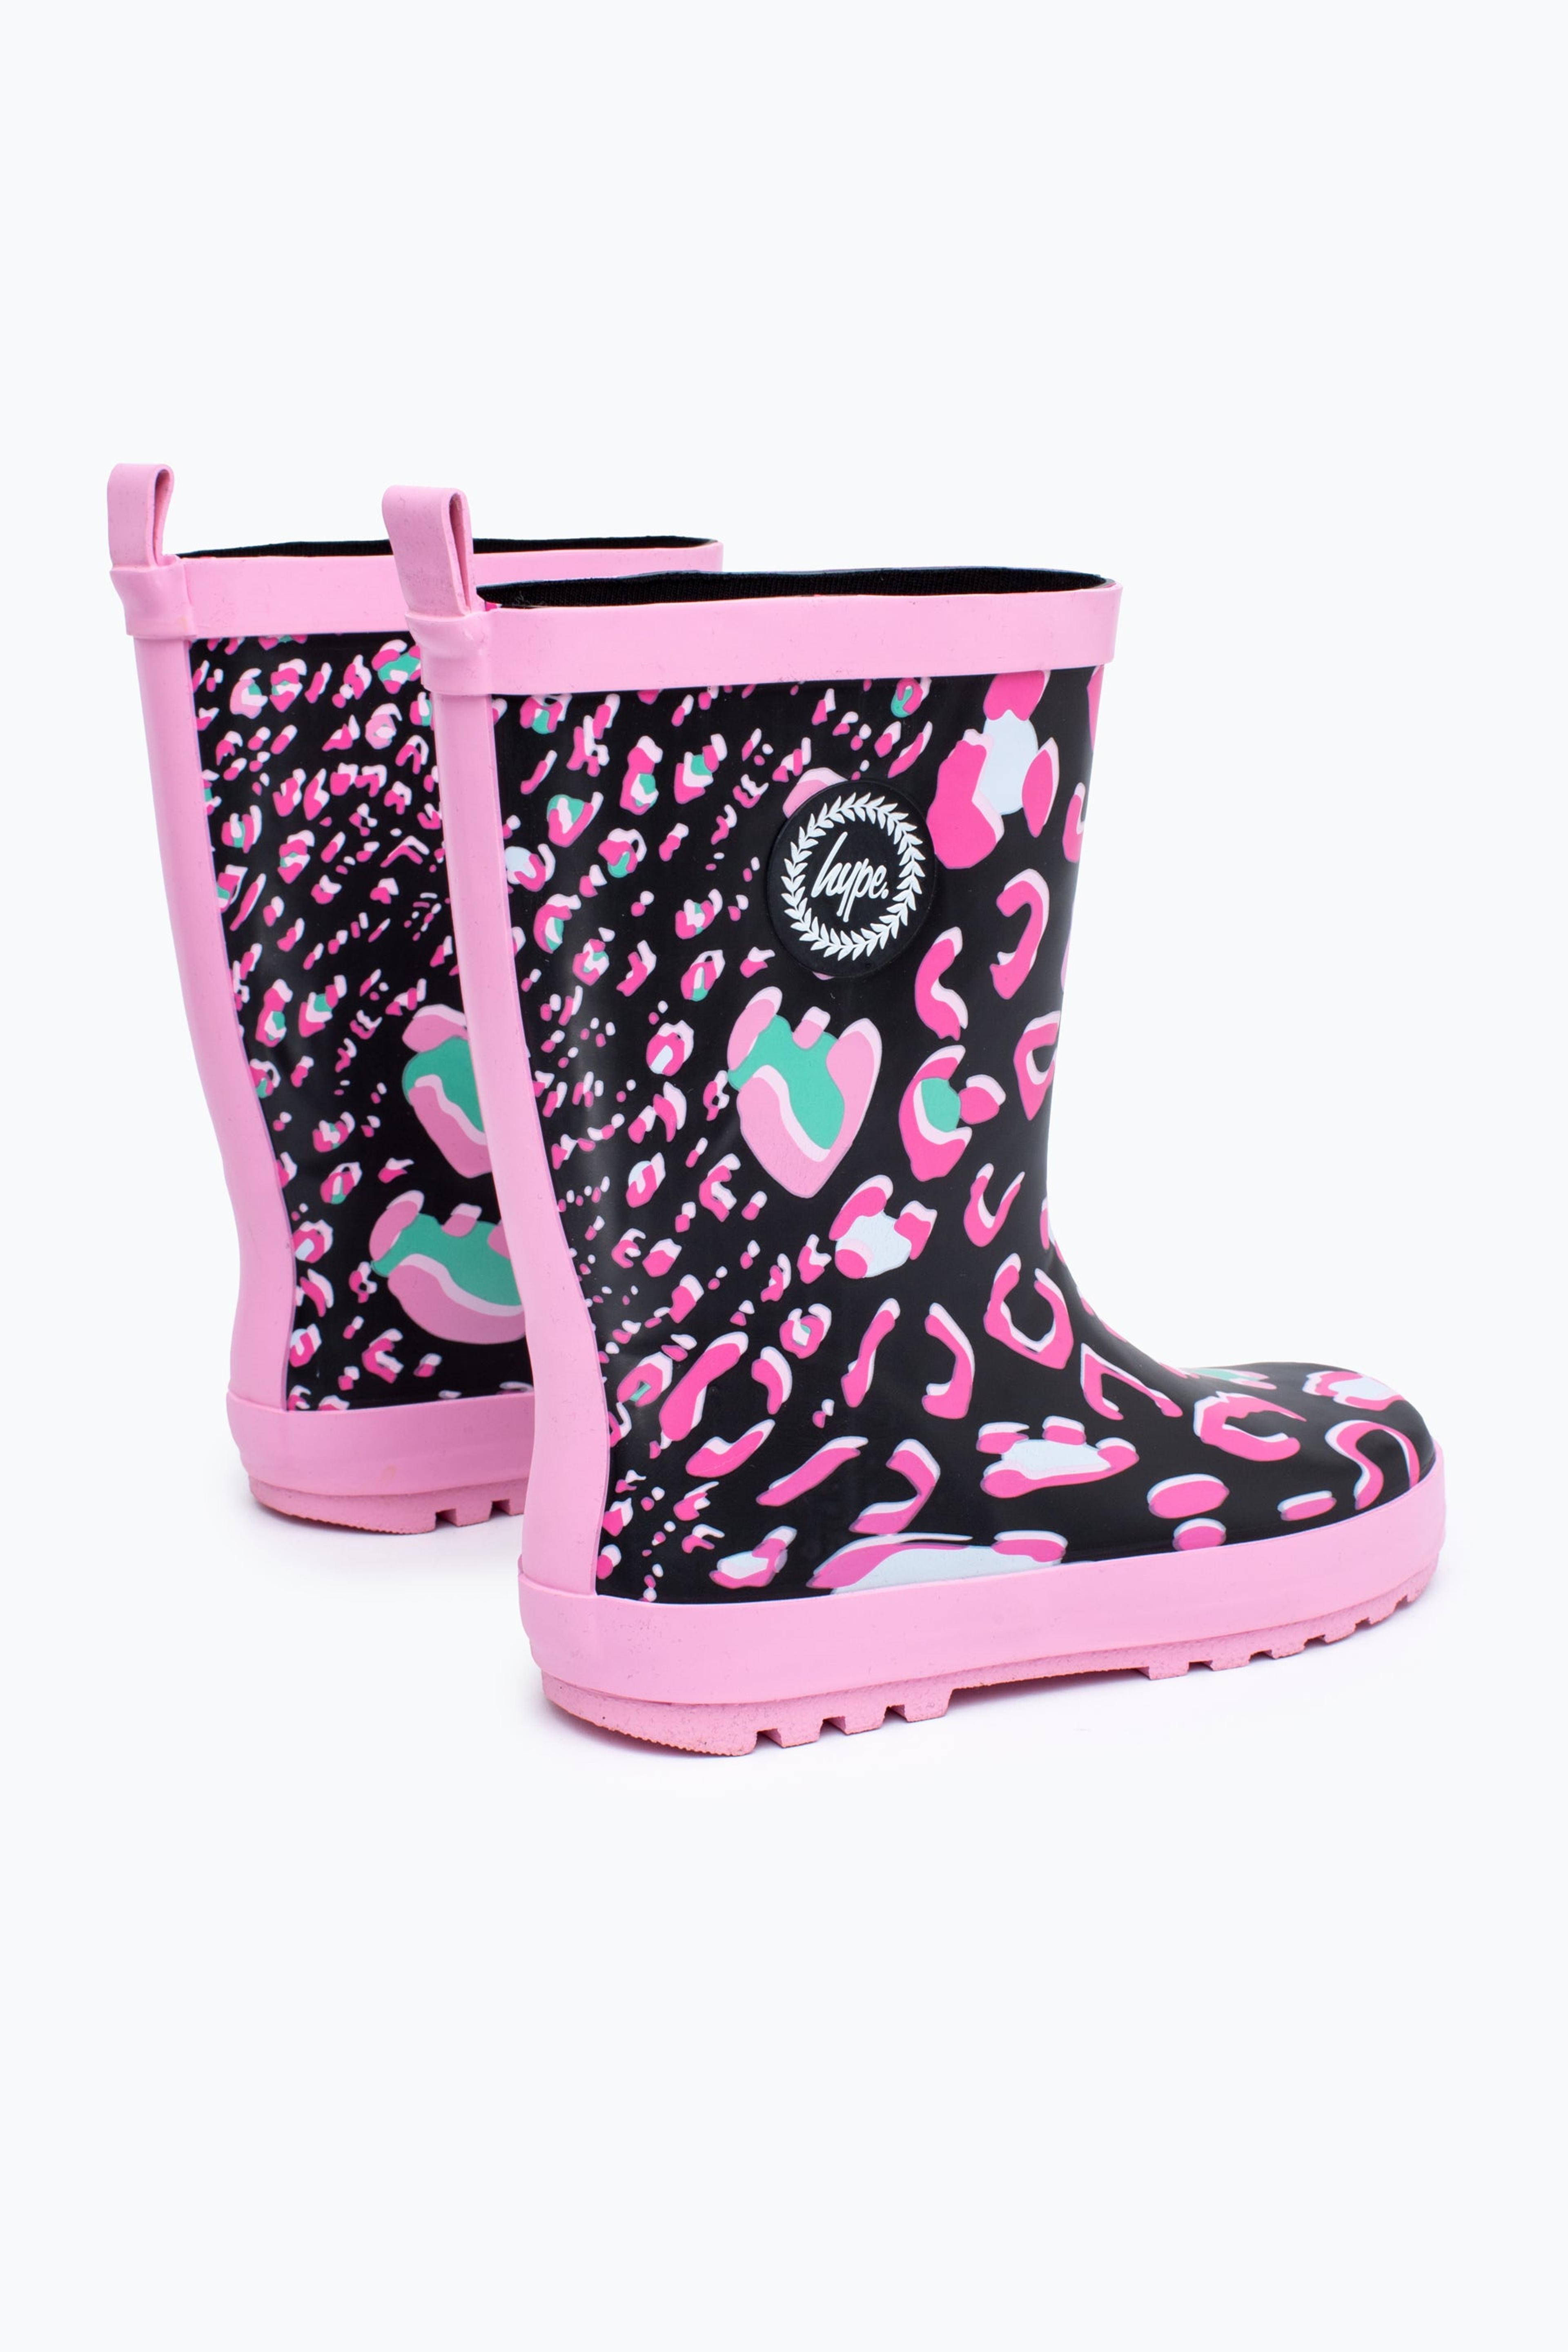 Alternate View 1 of HYPE GIRLS PINK LEOPARD WELLIES